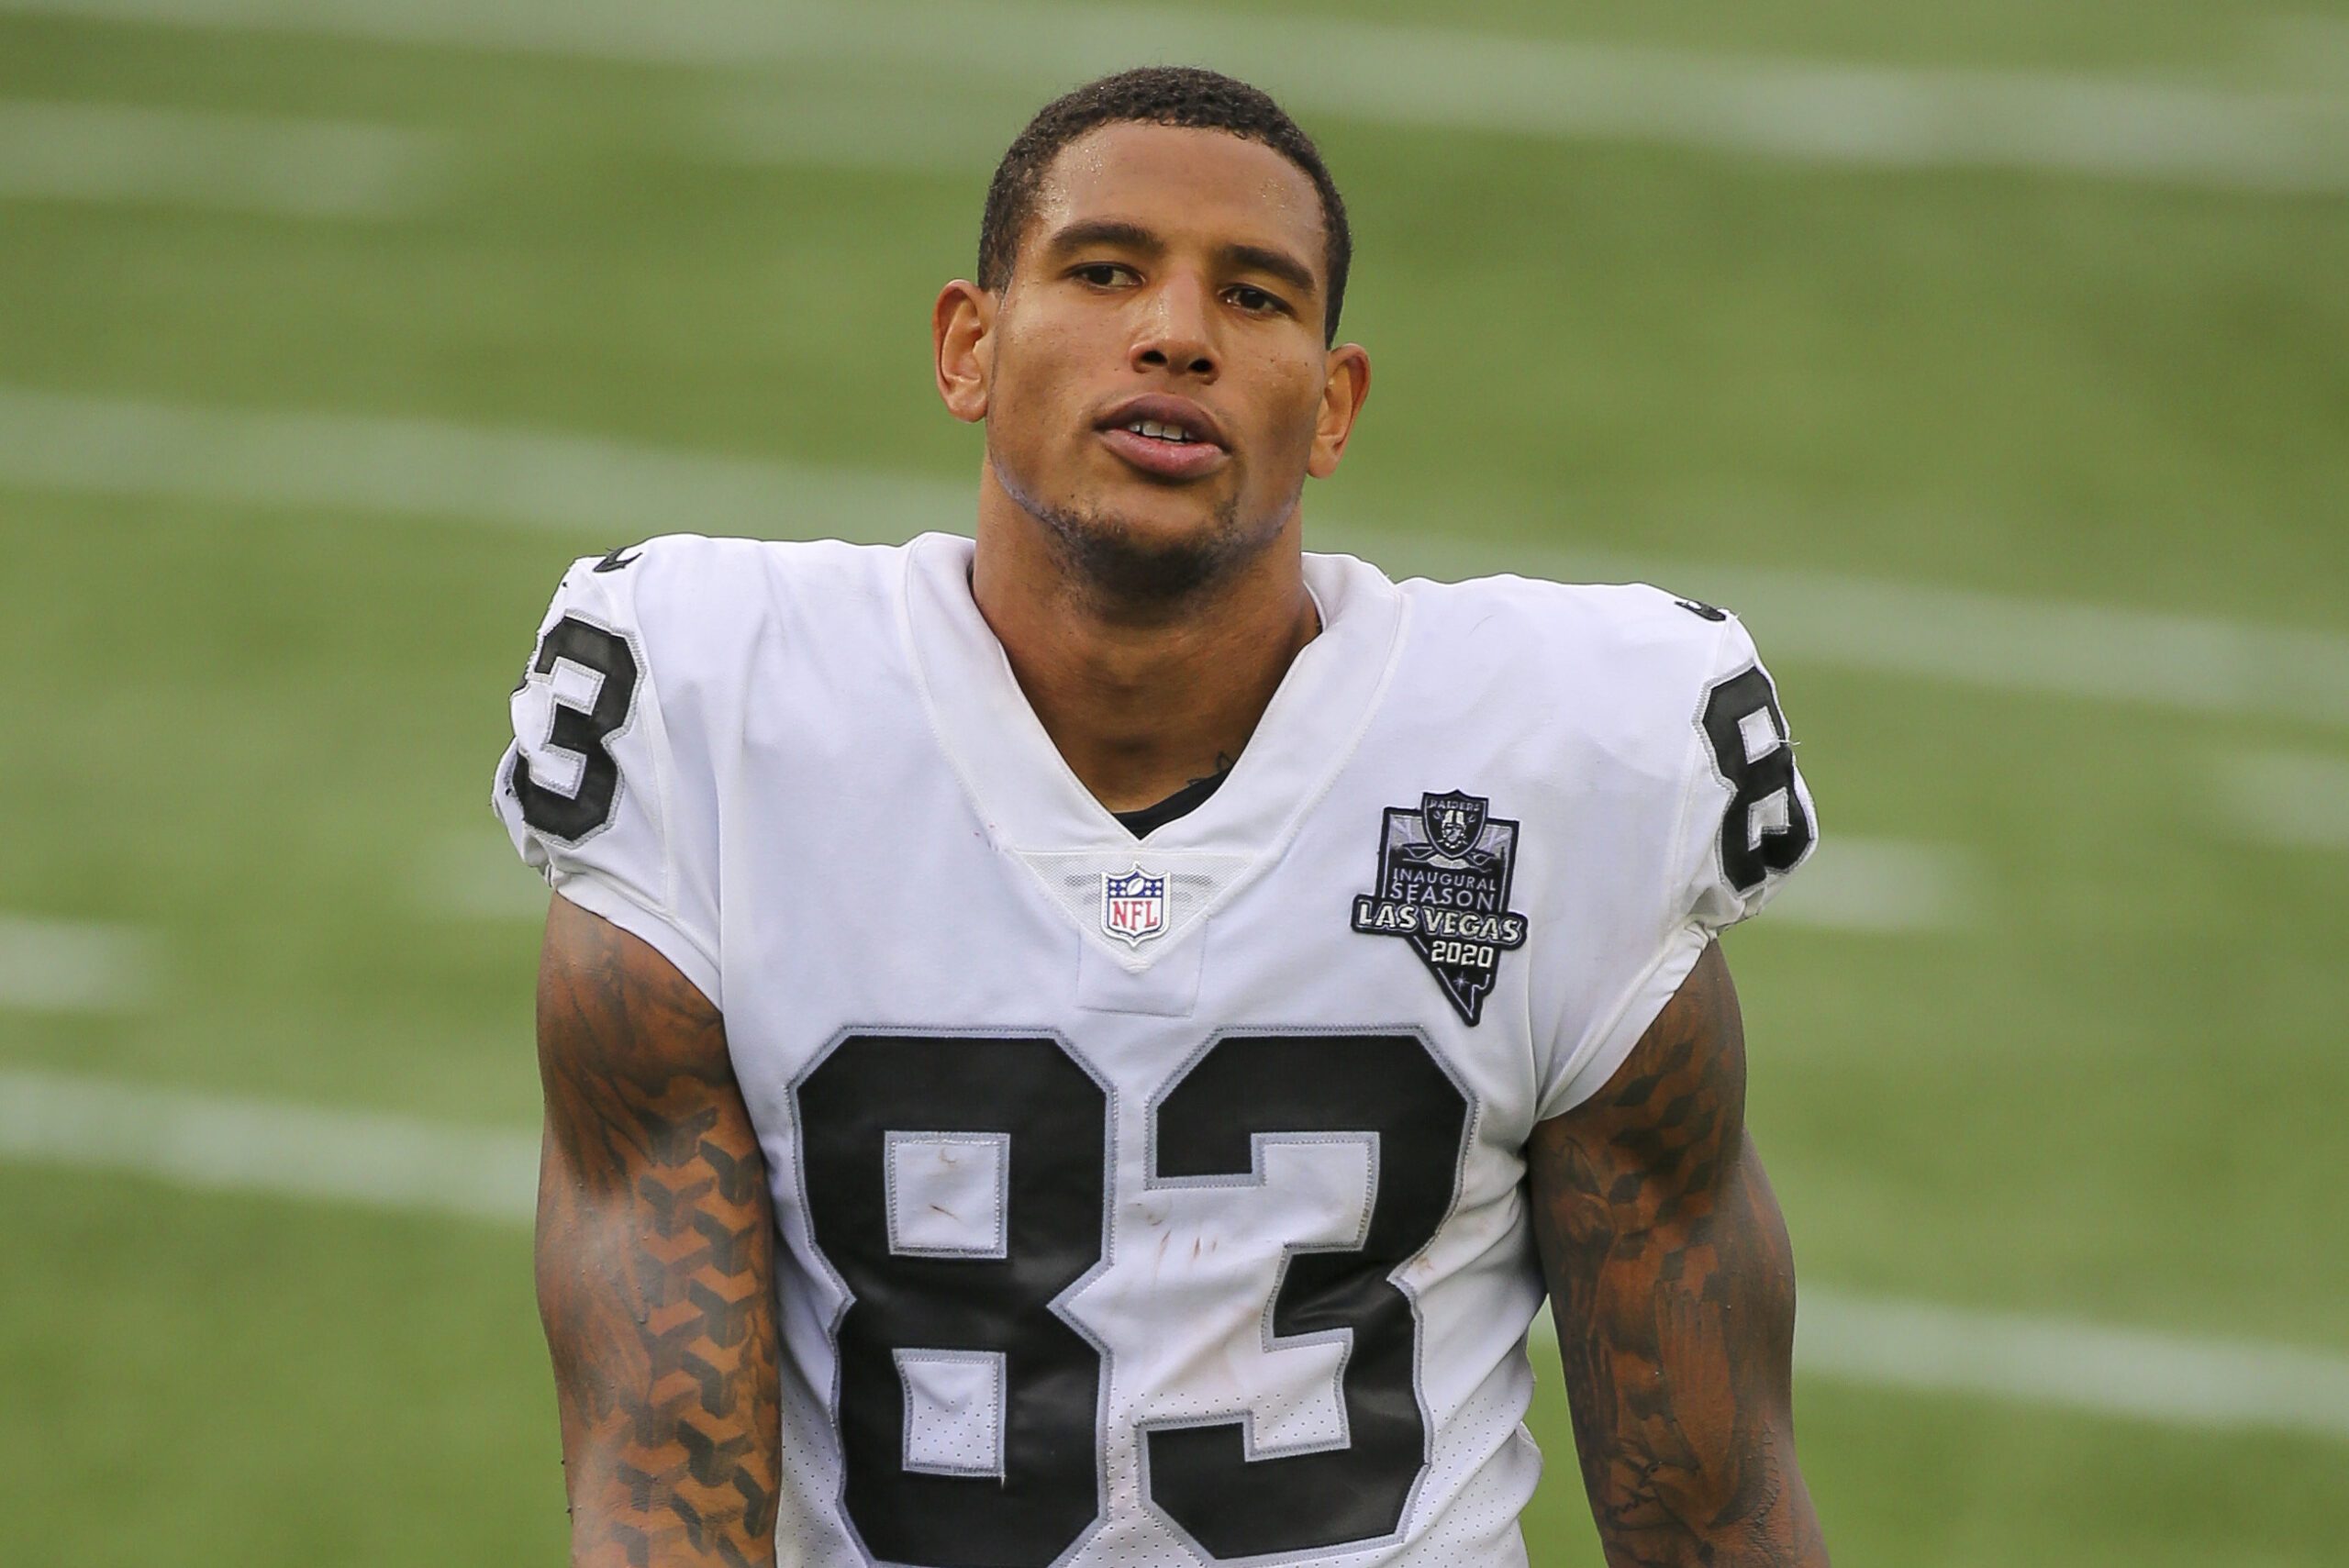 Charge Dropped Against Raiders WR For Shoving Photographer